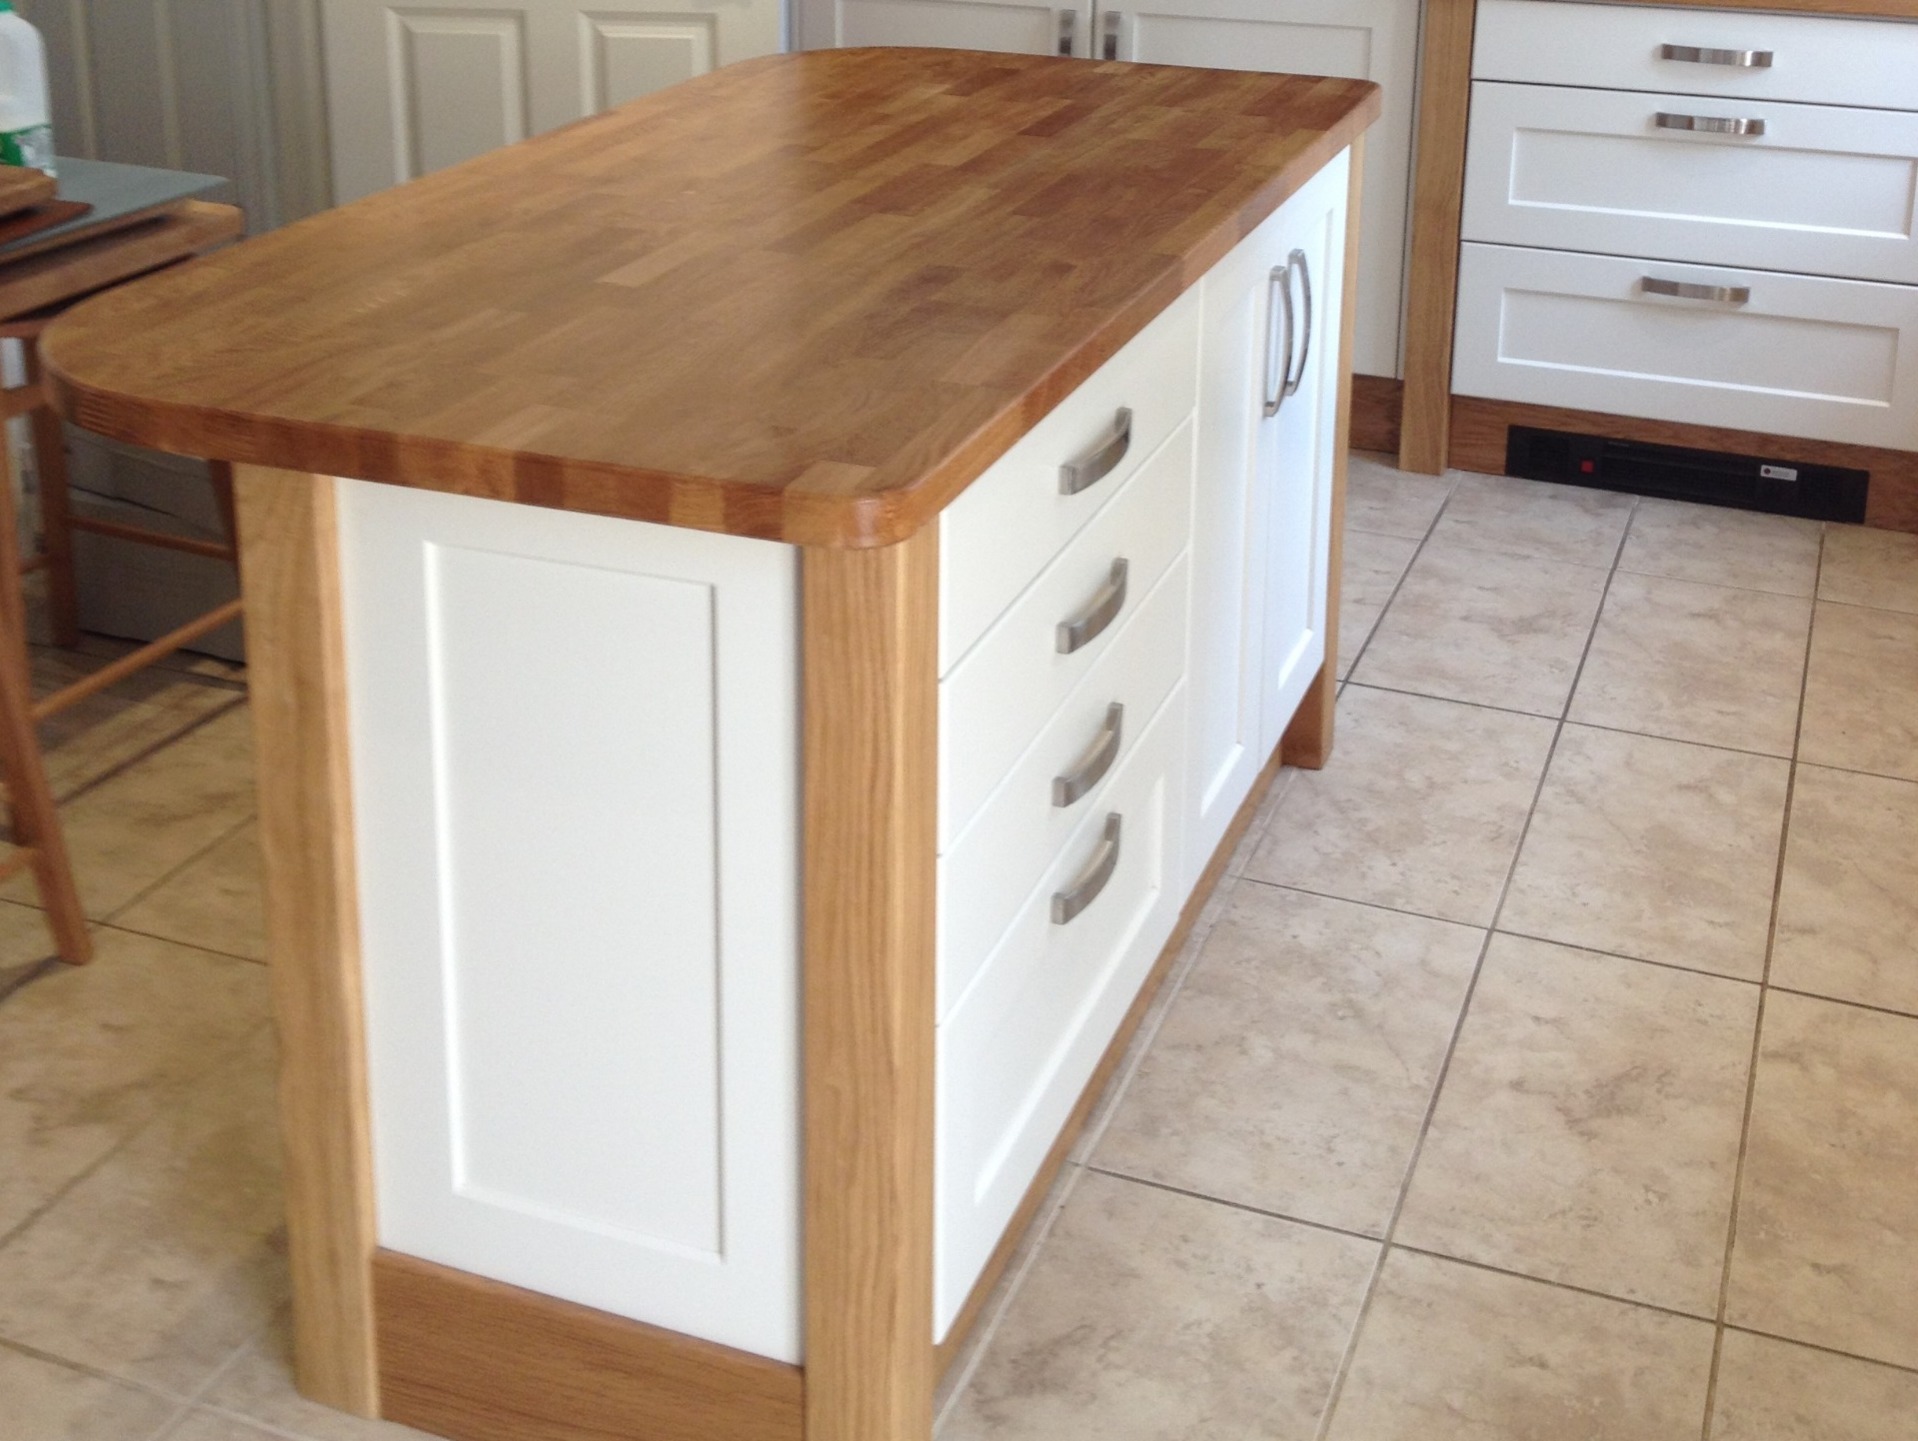 Island with timber worktop